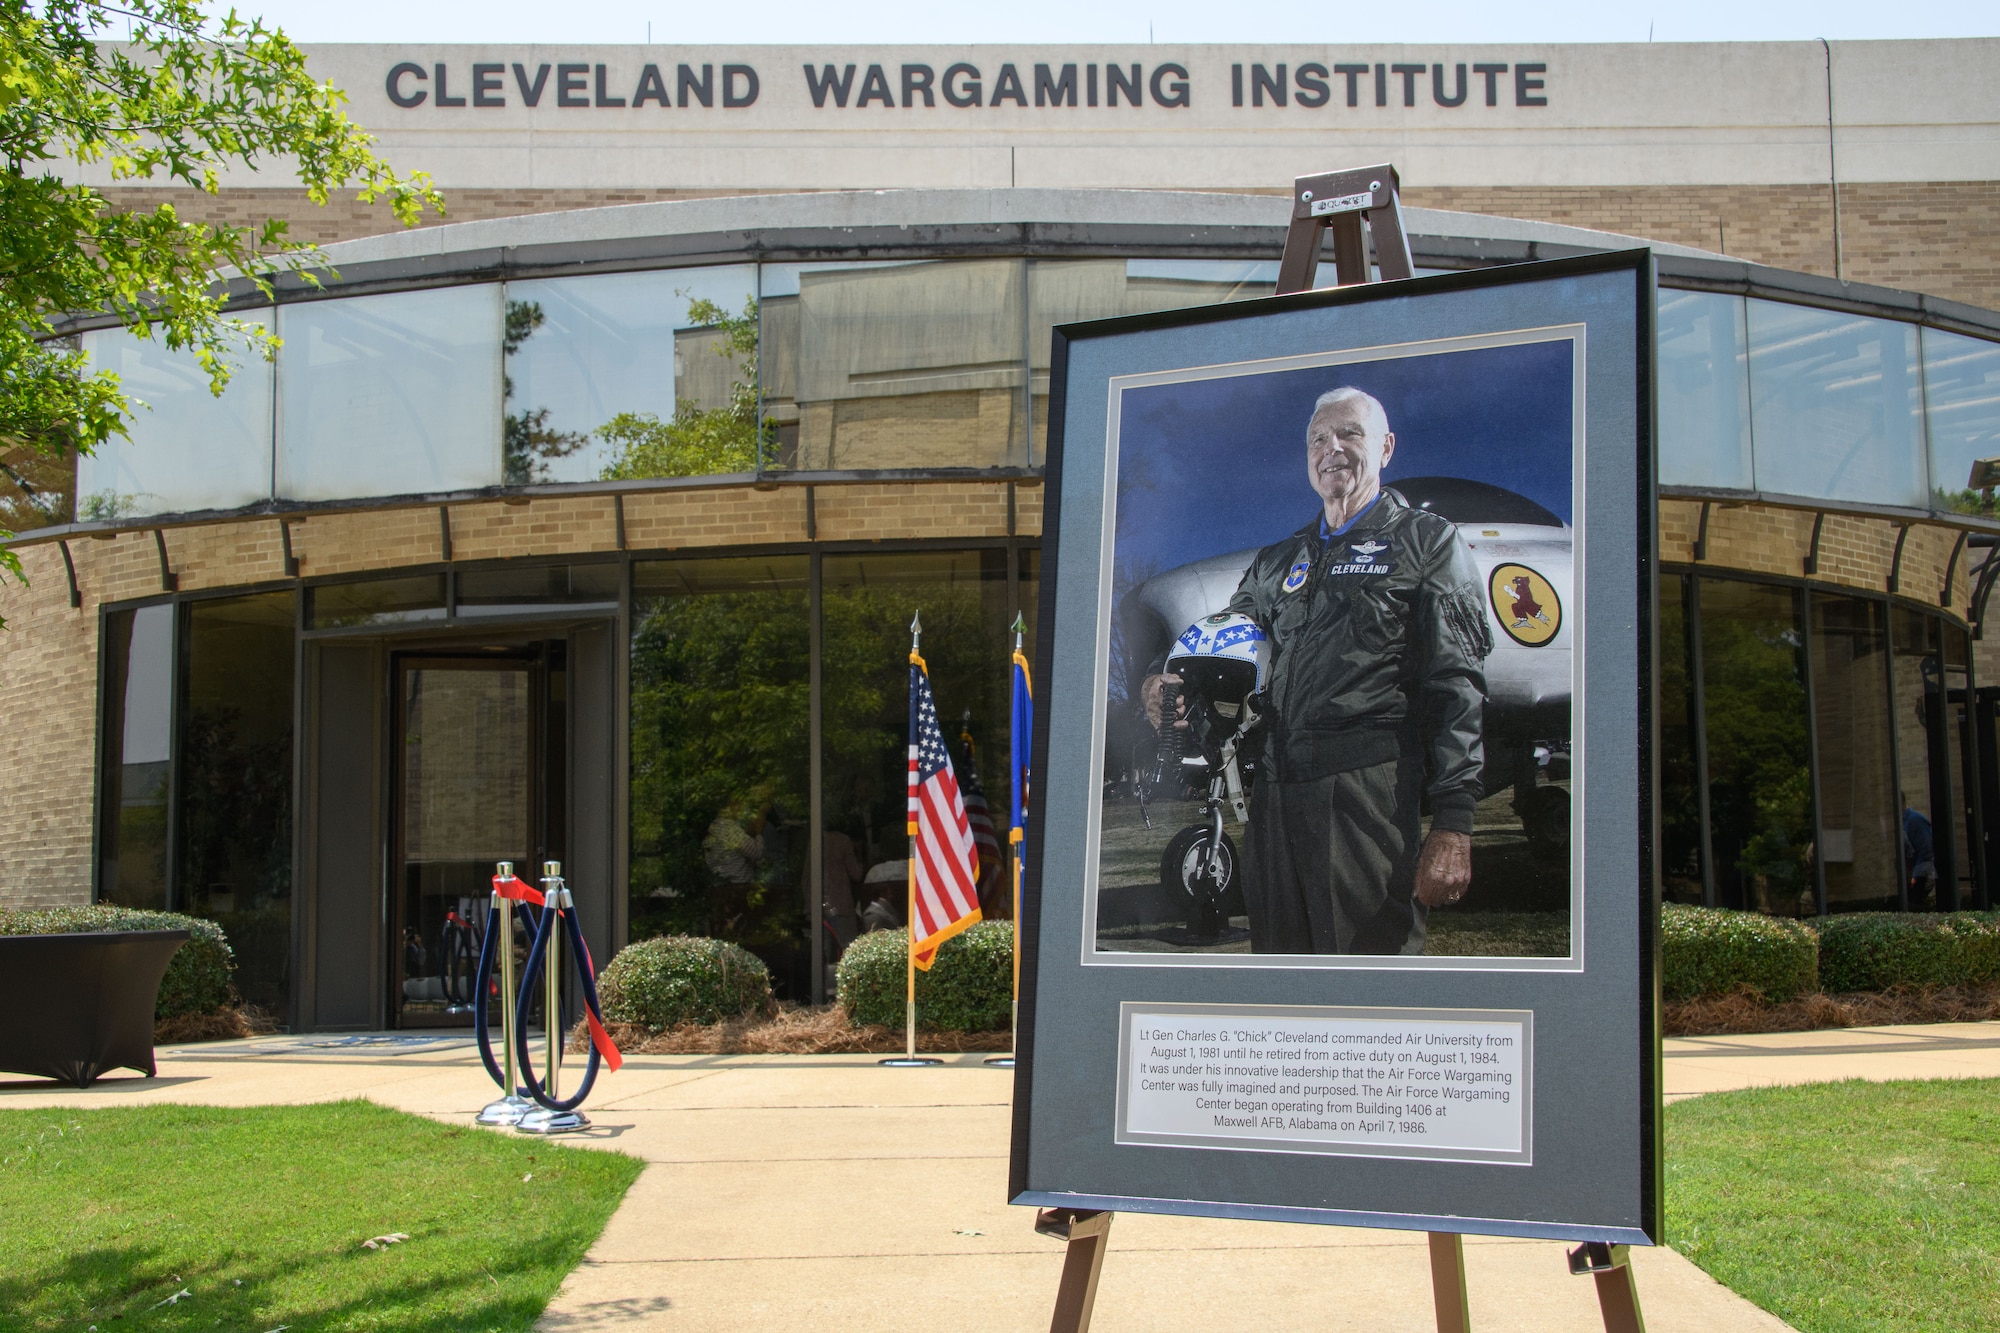 The Curtis E. LeMay Center for Doctrine Development and Education dedicated the Cleveland Wargaming Institute building in honor of the late Lt. Gen. Charles “Chick” Cleveland during a ceremony May 25, 2023, at Maxwell Air Force Base, Alabama. The building houses the Air Force Wargaming Institute. Cleveland is a Korean War fighter ace and a former commander of Air University.